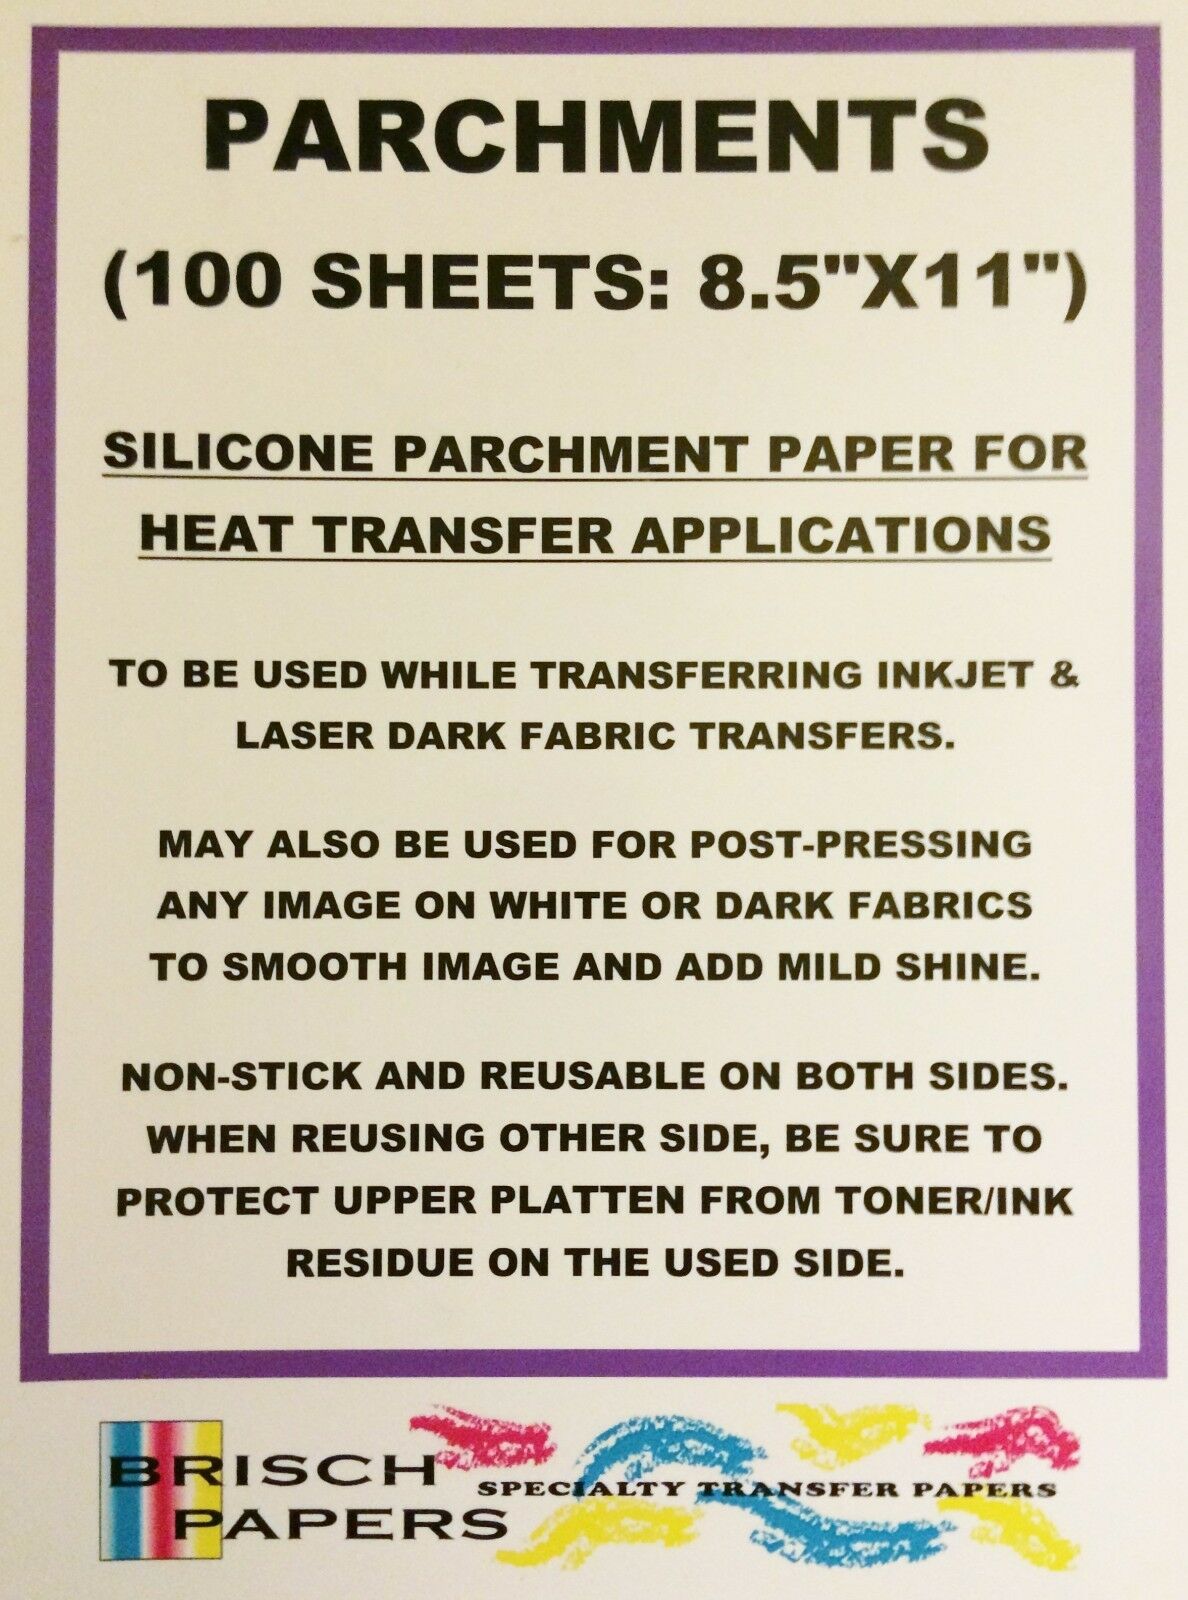 Silicone Parchment Paper For Heat Transfer Applications (8.5"x11") 100 Sheets/pk